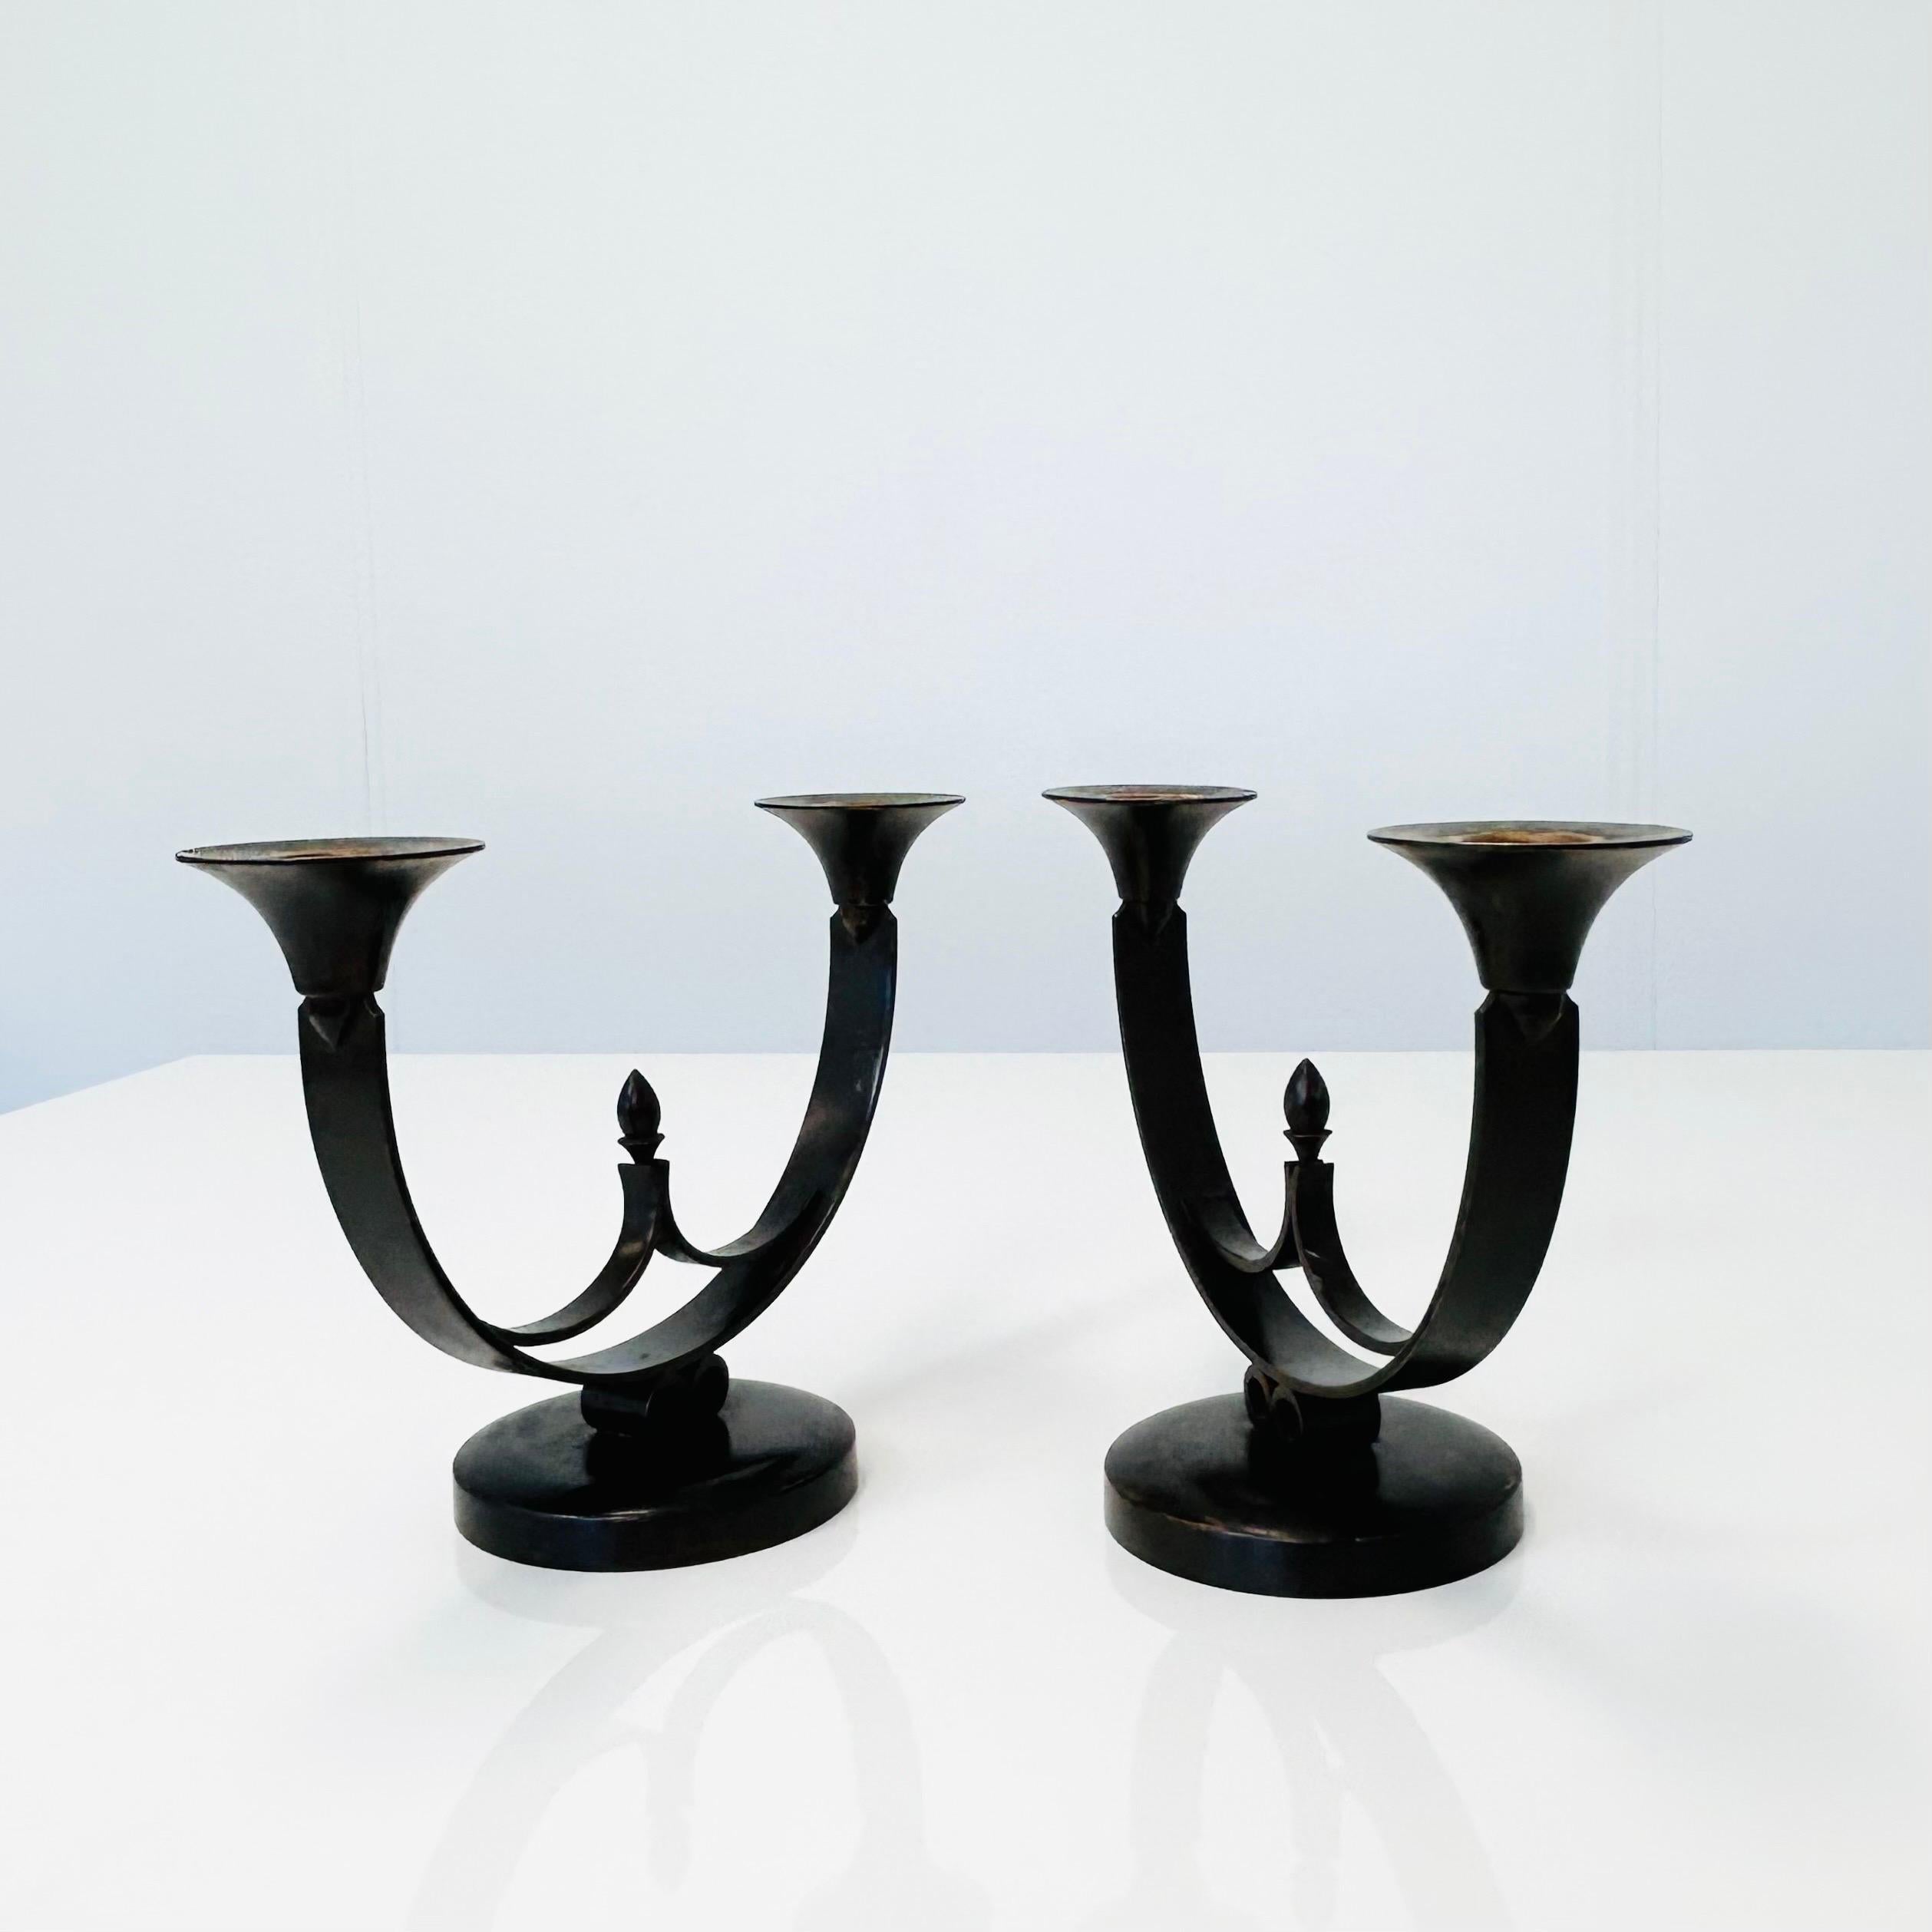 Pair of Light Bronze Candle Holders by Just Andersen, 1930s, Denmark For Sale 1